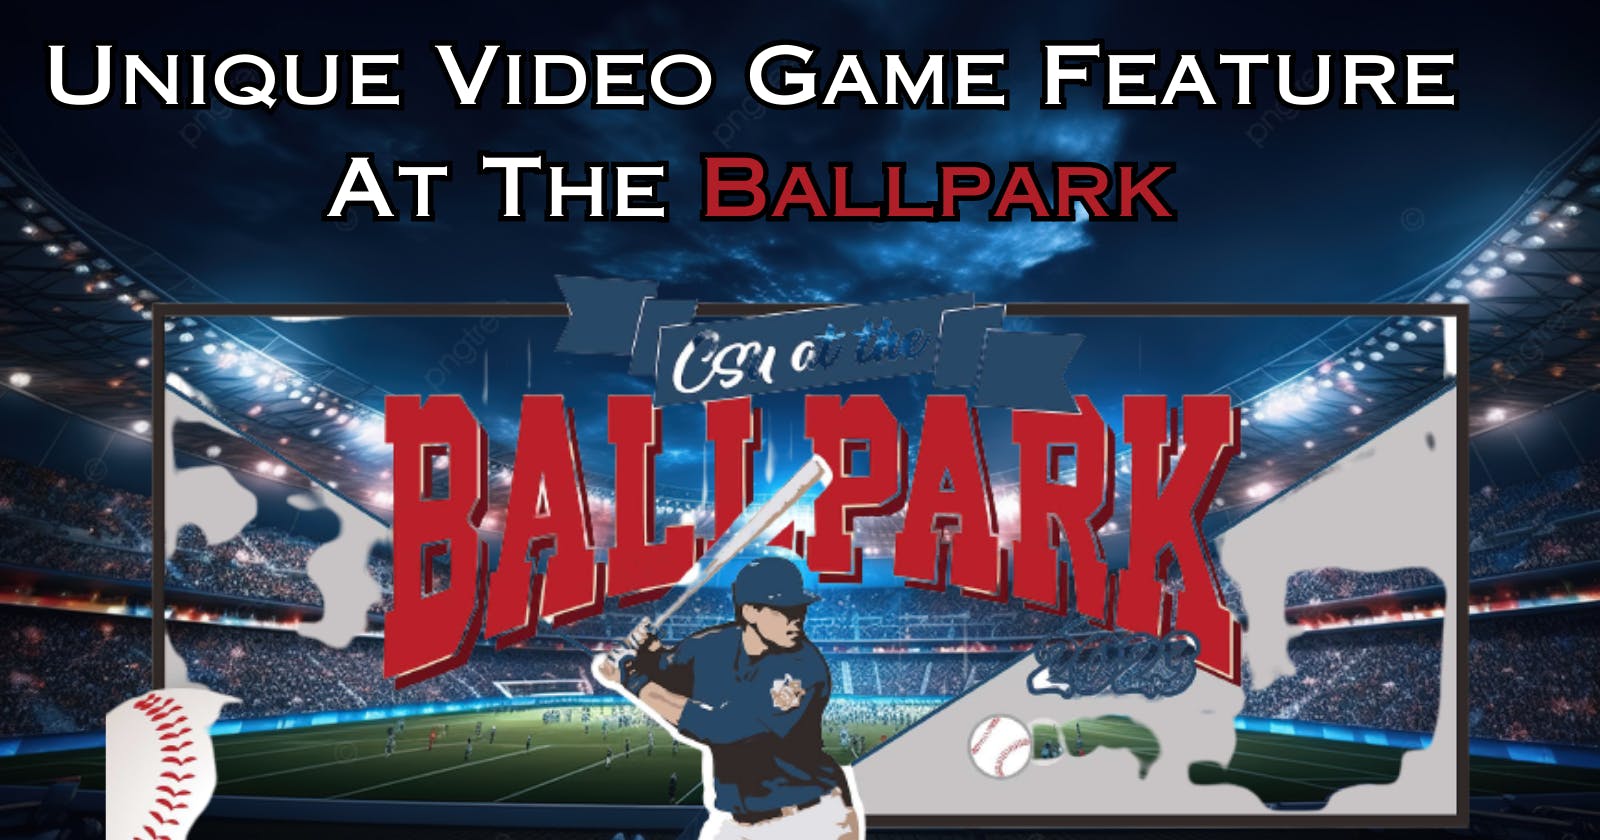 Unique Video Game Feature At The Ballpark